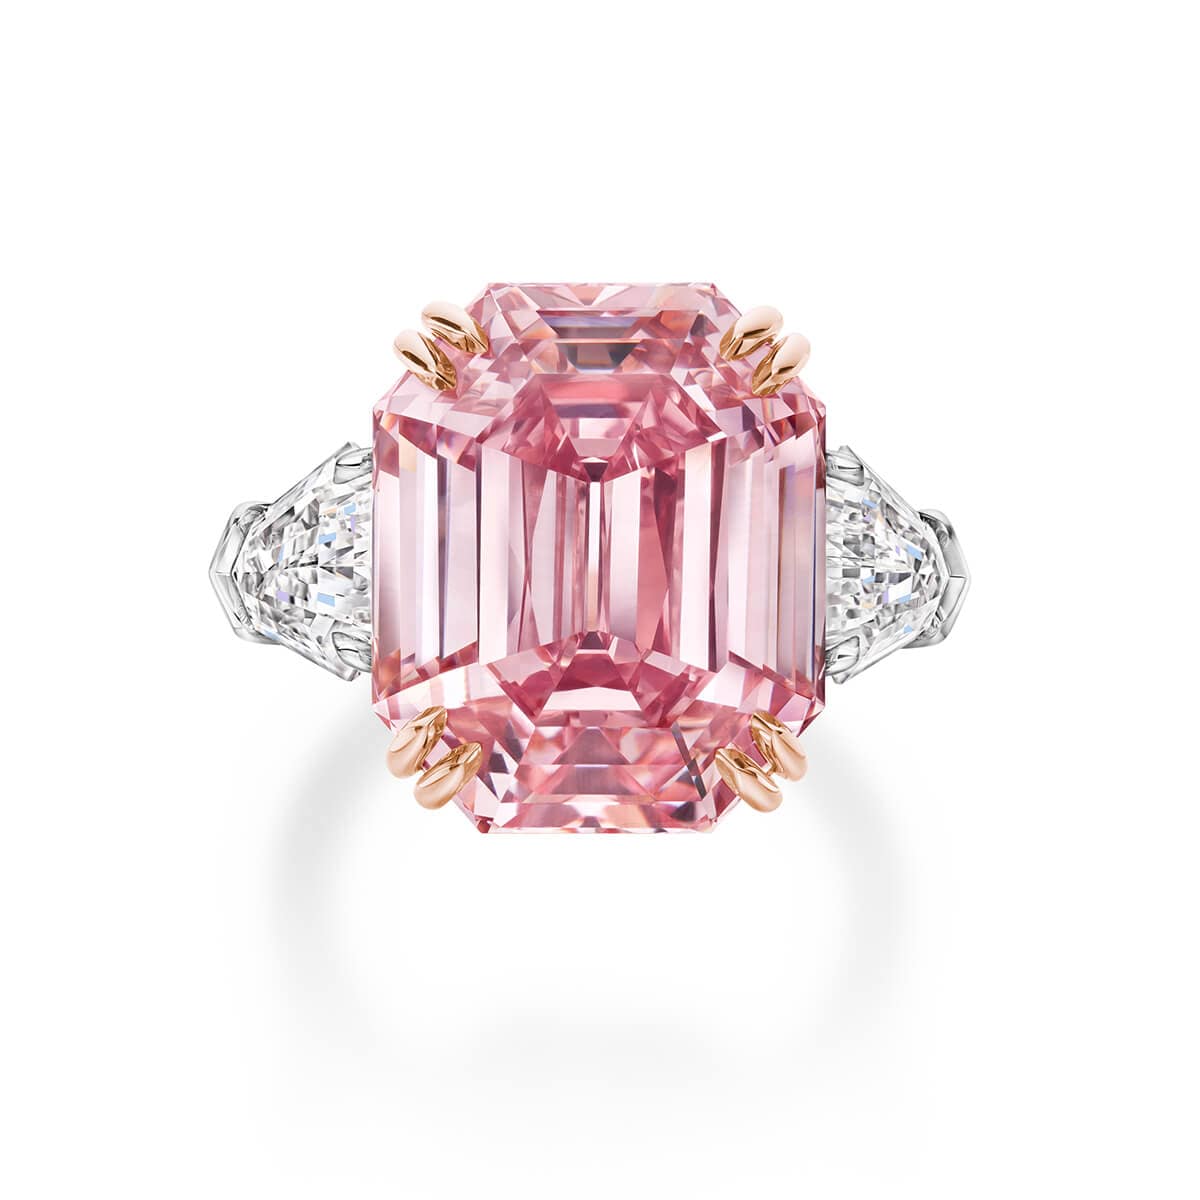 Image of the Winston Pink Legacy a fancy vivd pink diamond weighing 18.96 carats